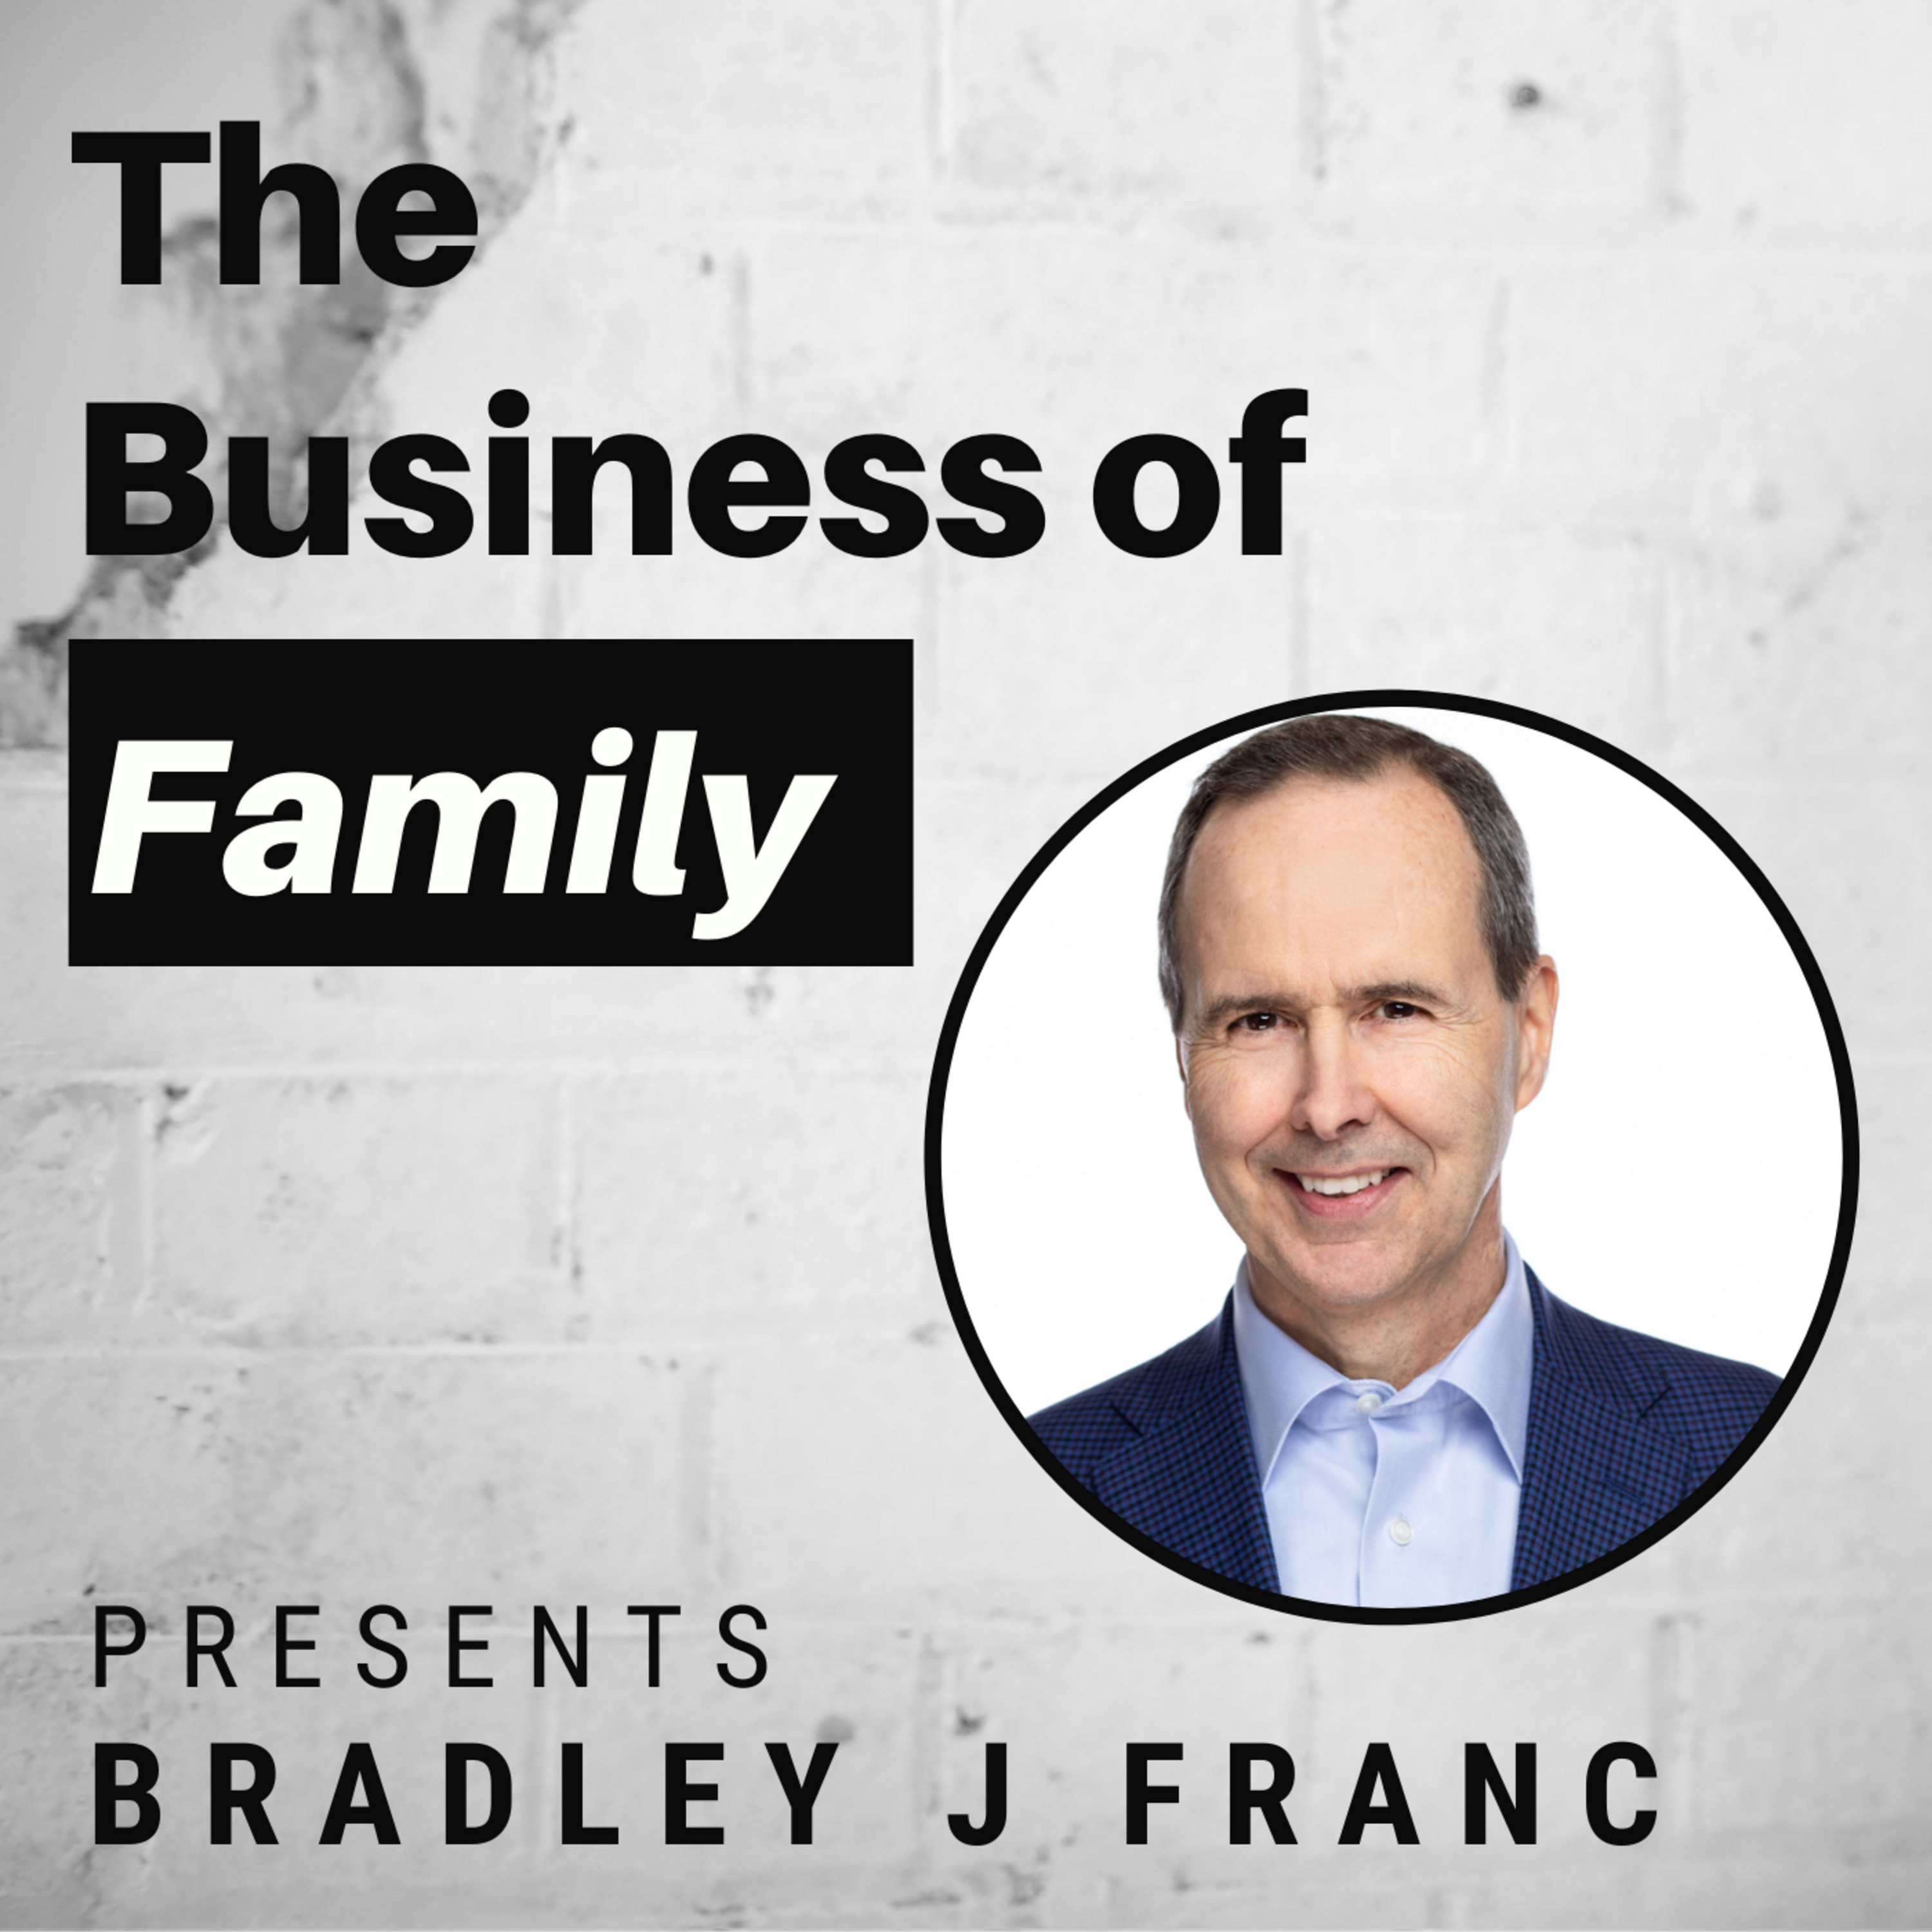 Bradley J Franc - Increase the Value and Maintain the Values